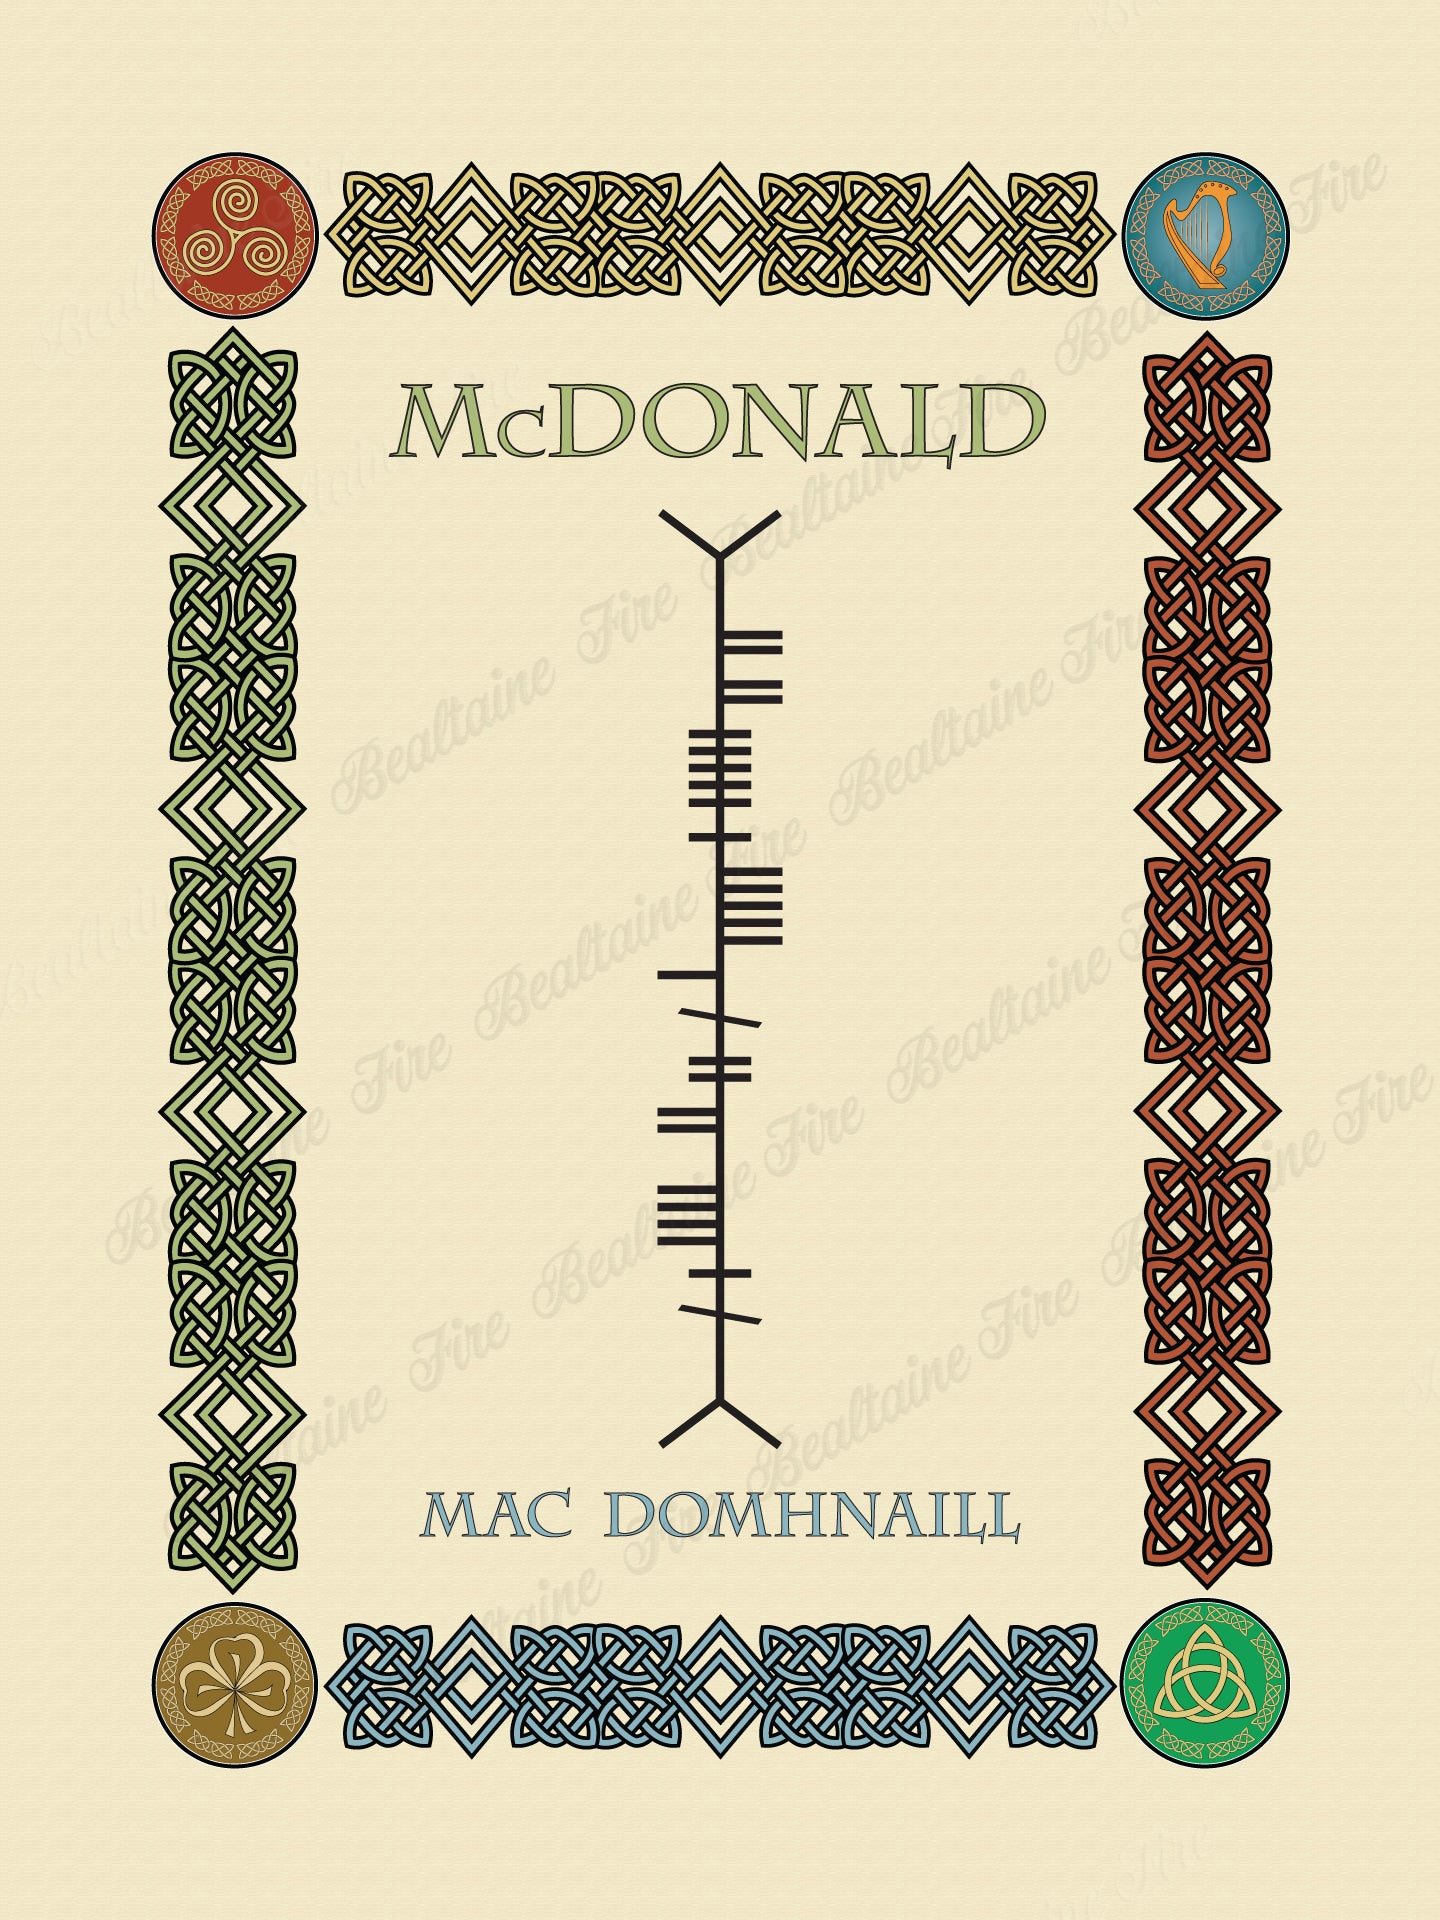 McDonald in Old Irish and Ogham - PDF Download